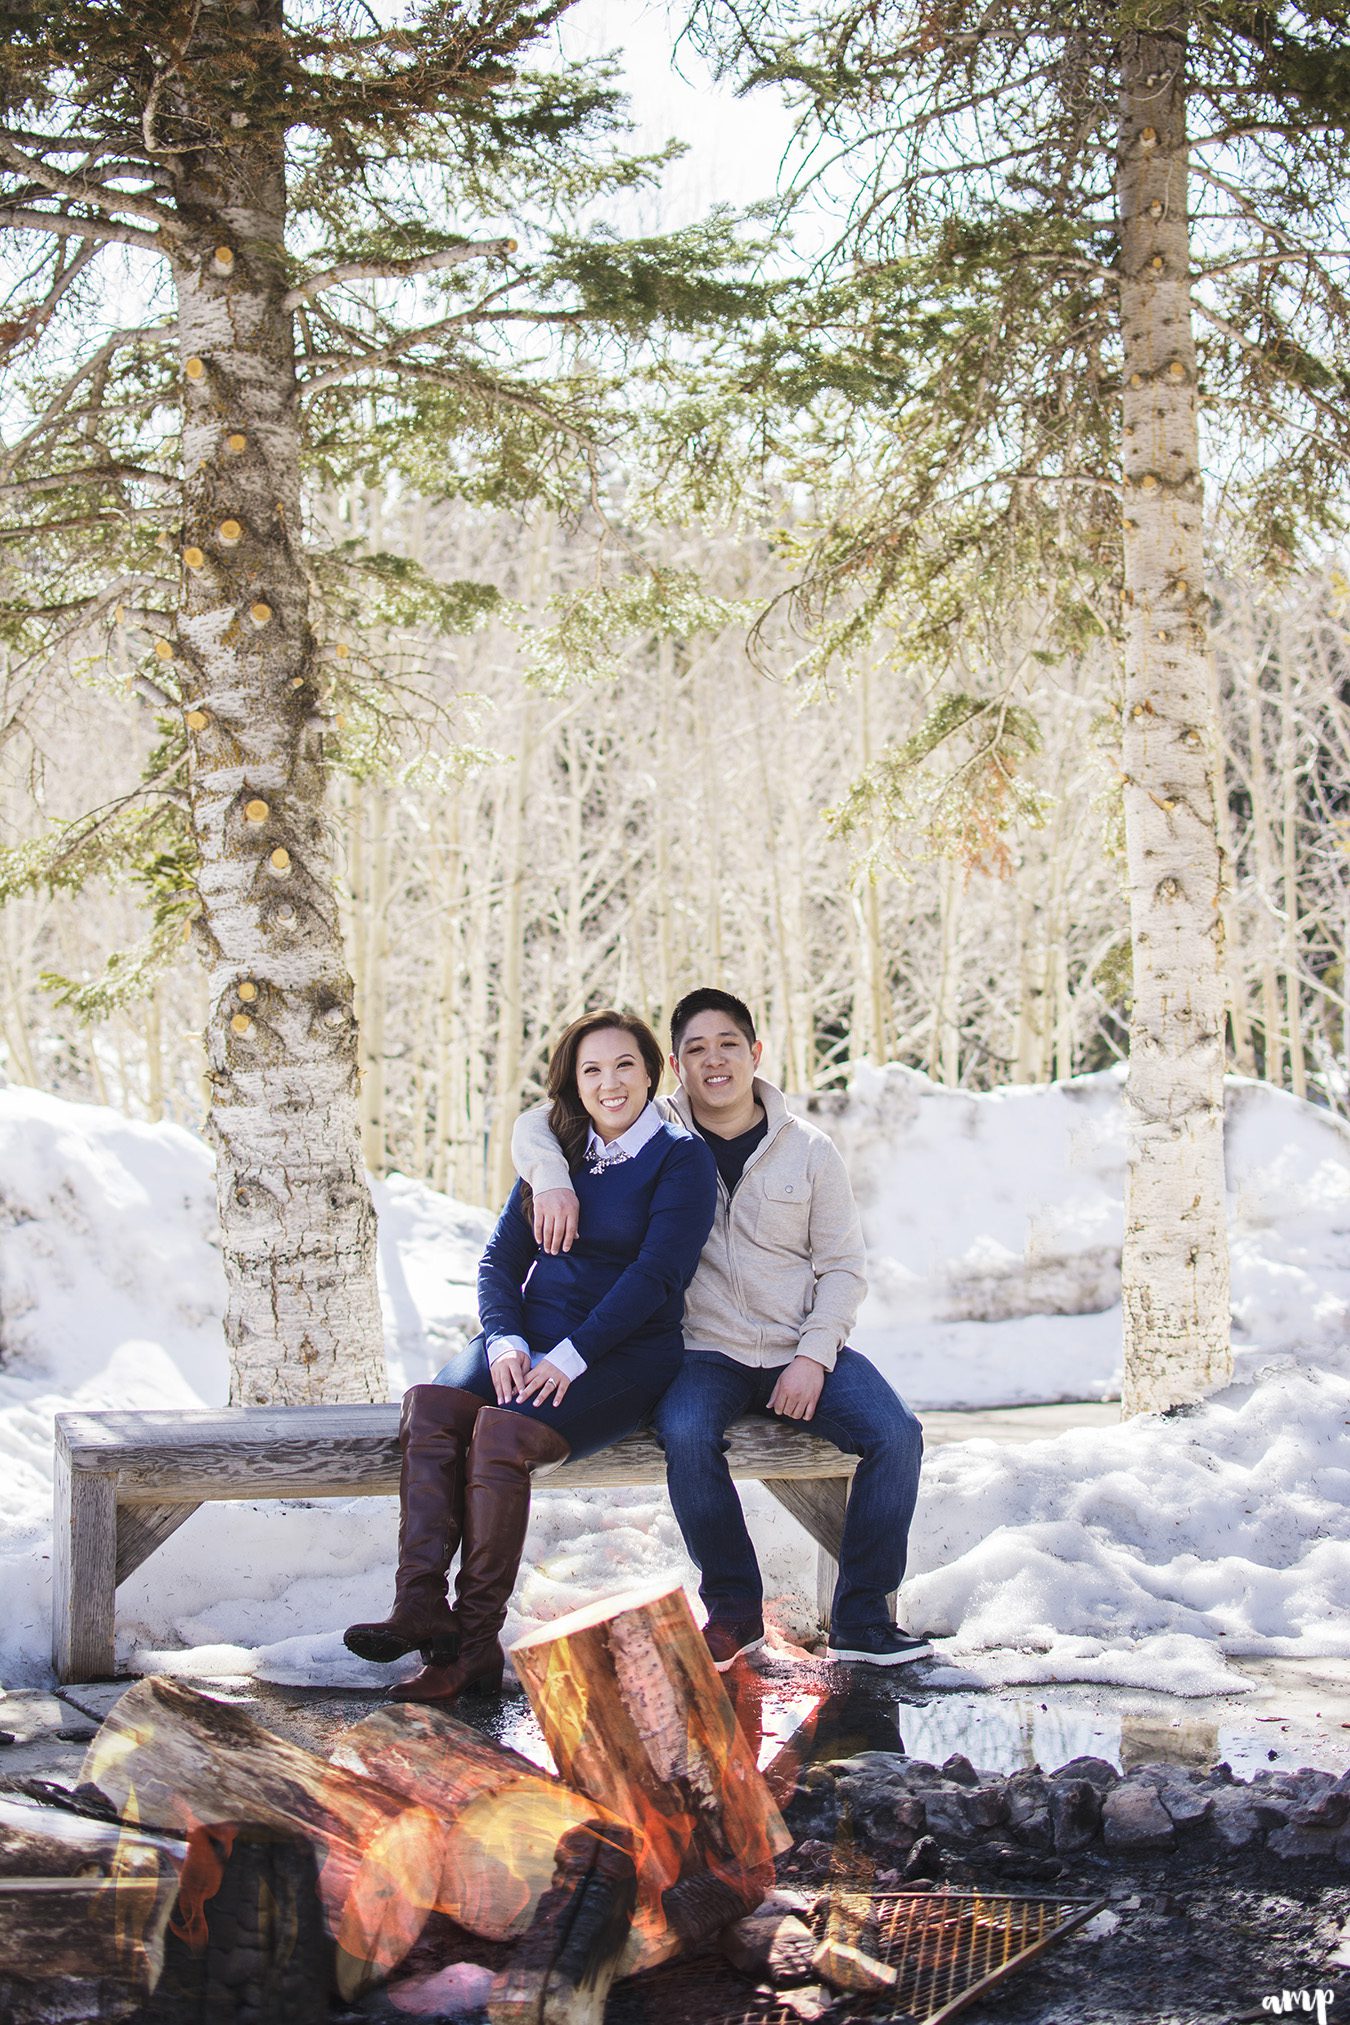 Engaged couple sitting beside bonfire surrounded by snow